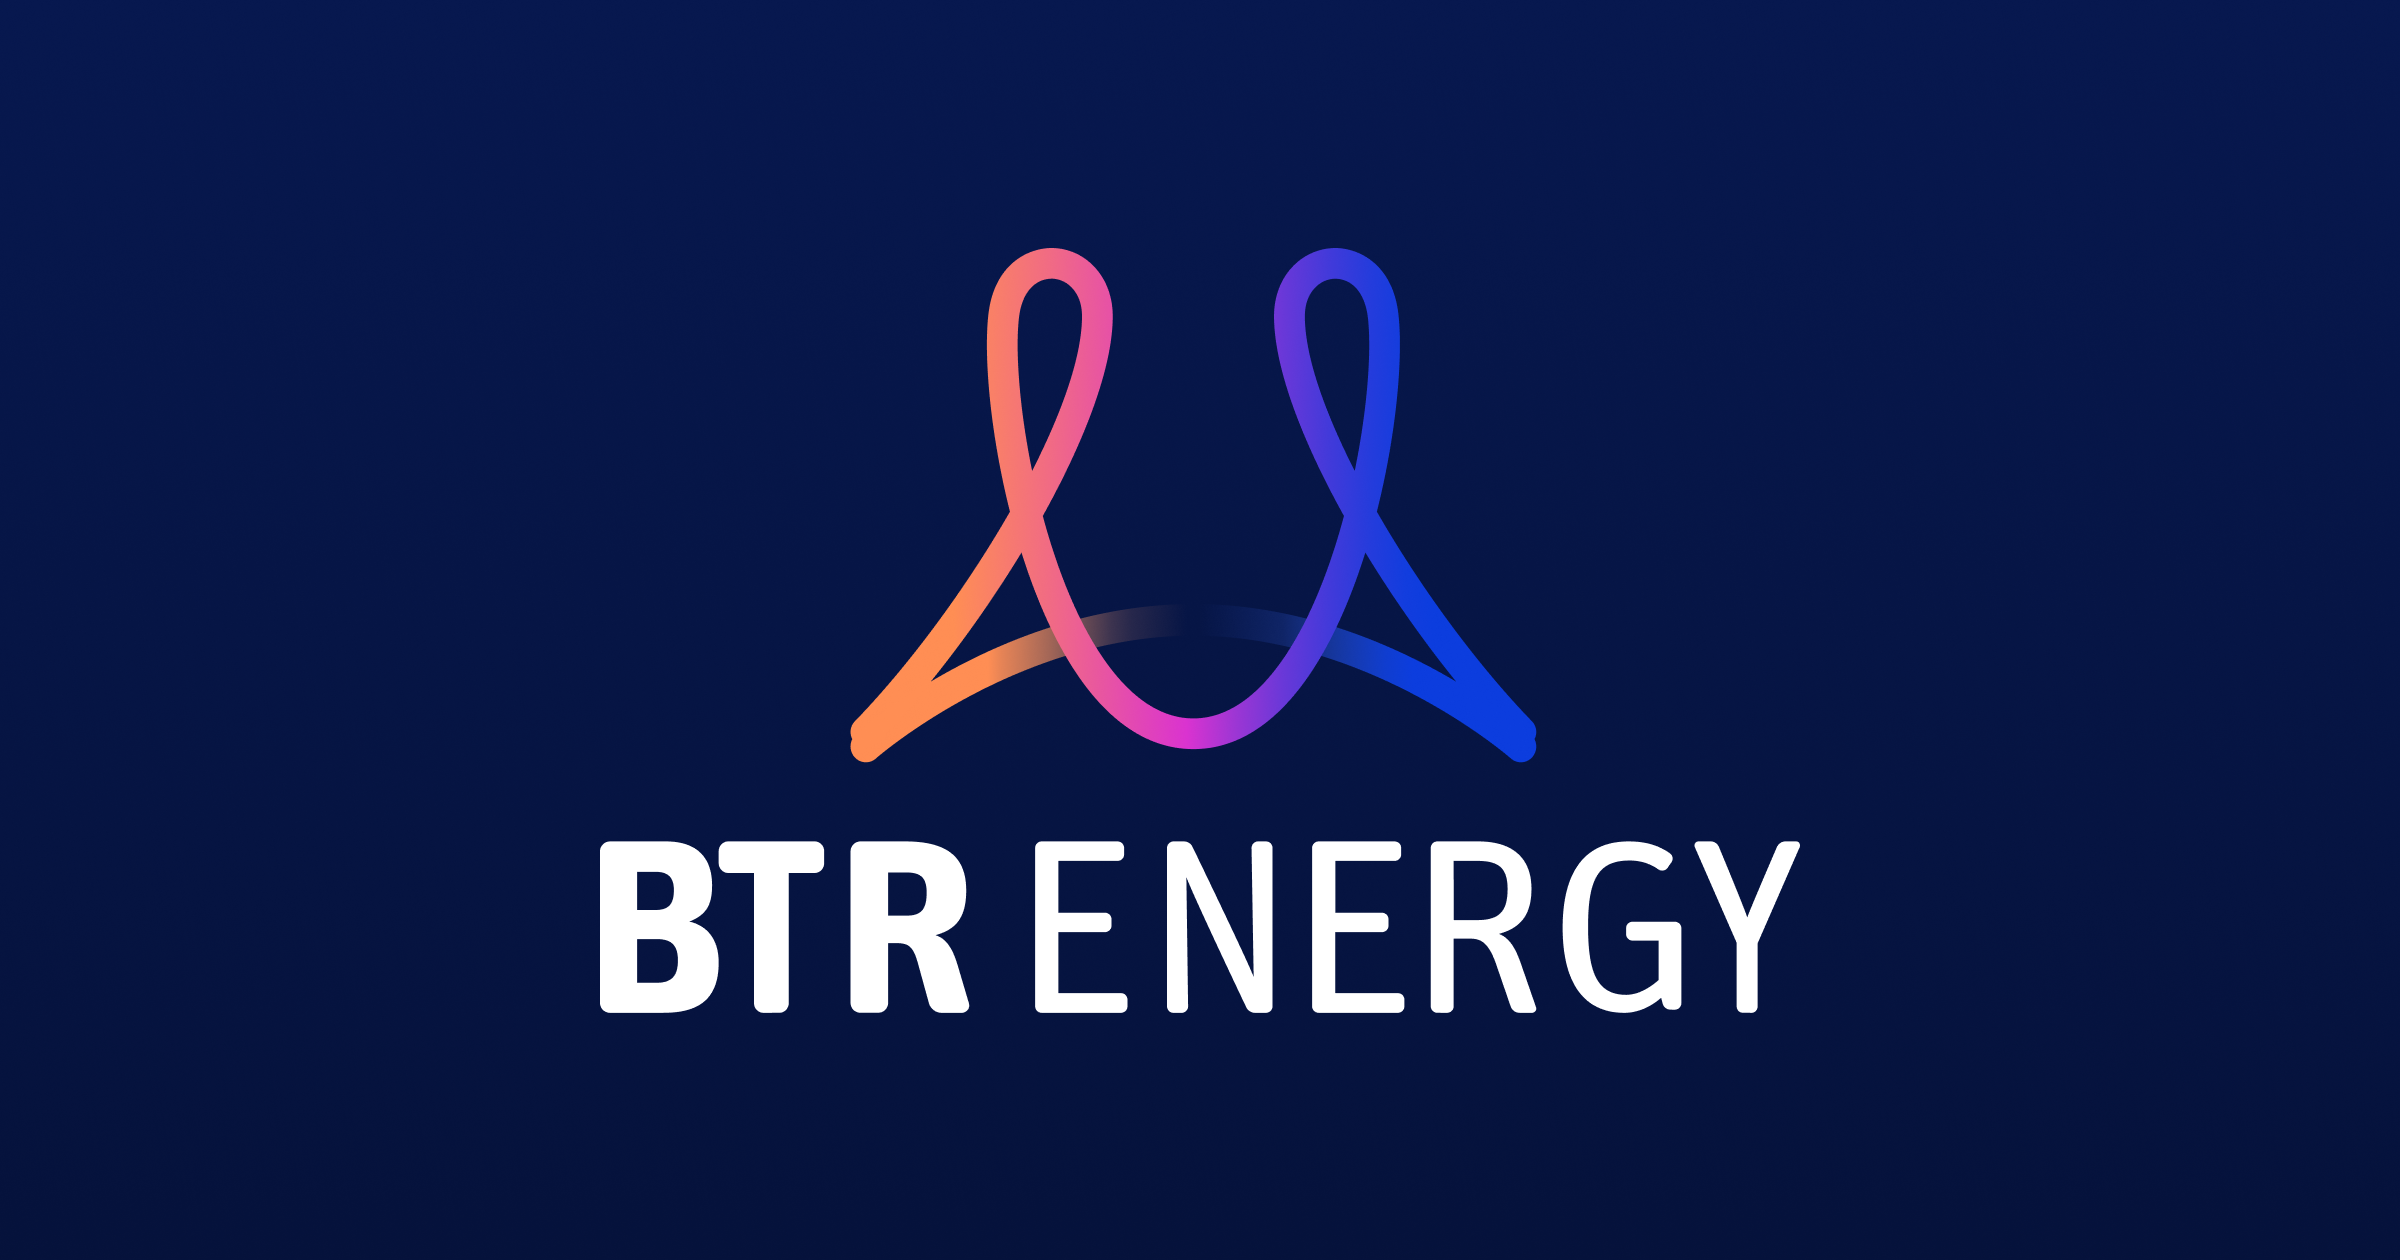 Agile Workflow Enabled Startup BTR Energy to Automate Workflows